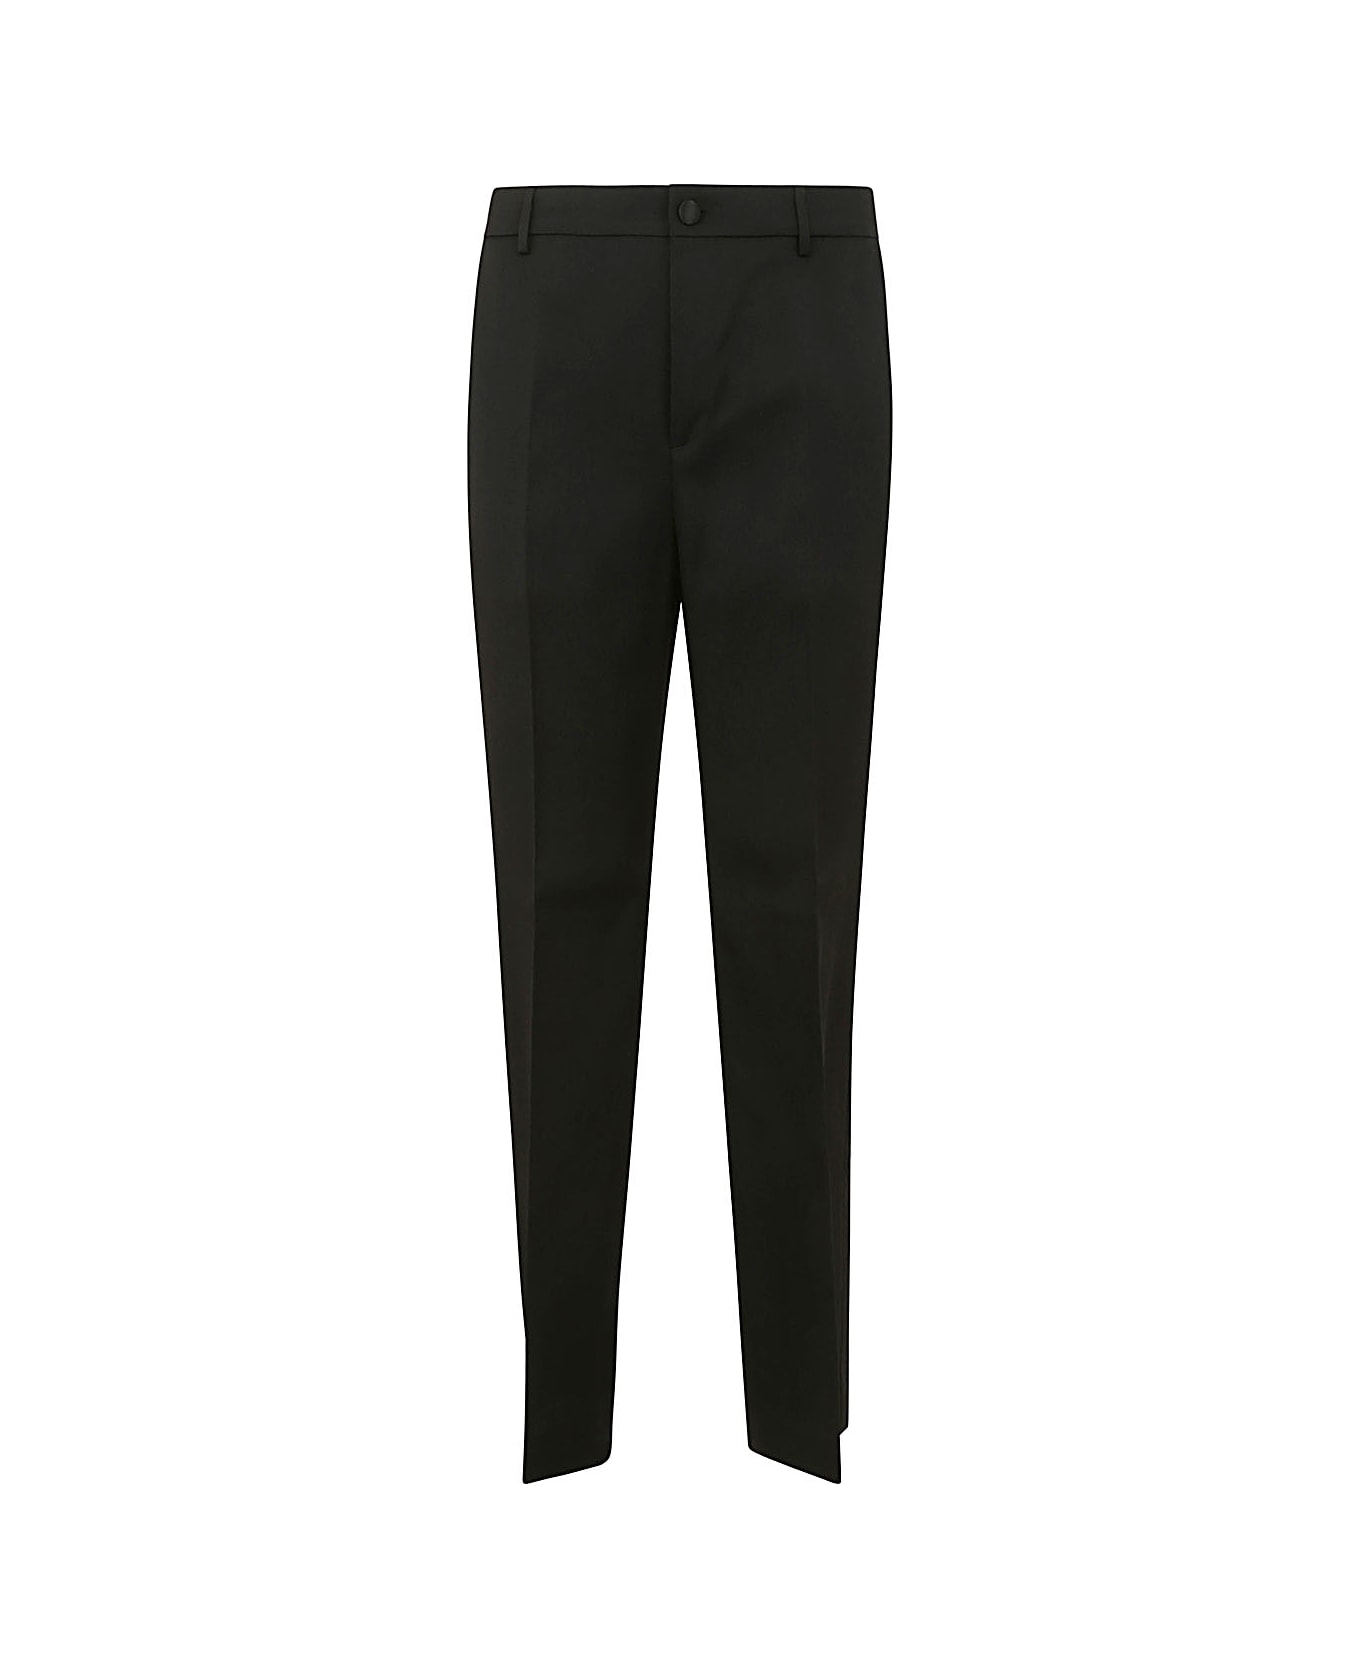 Golden Goose Relax Straight Pant - Black ボトムス